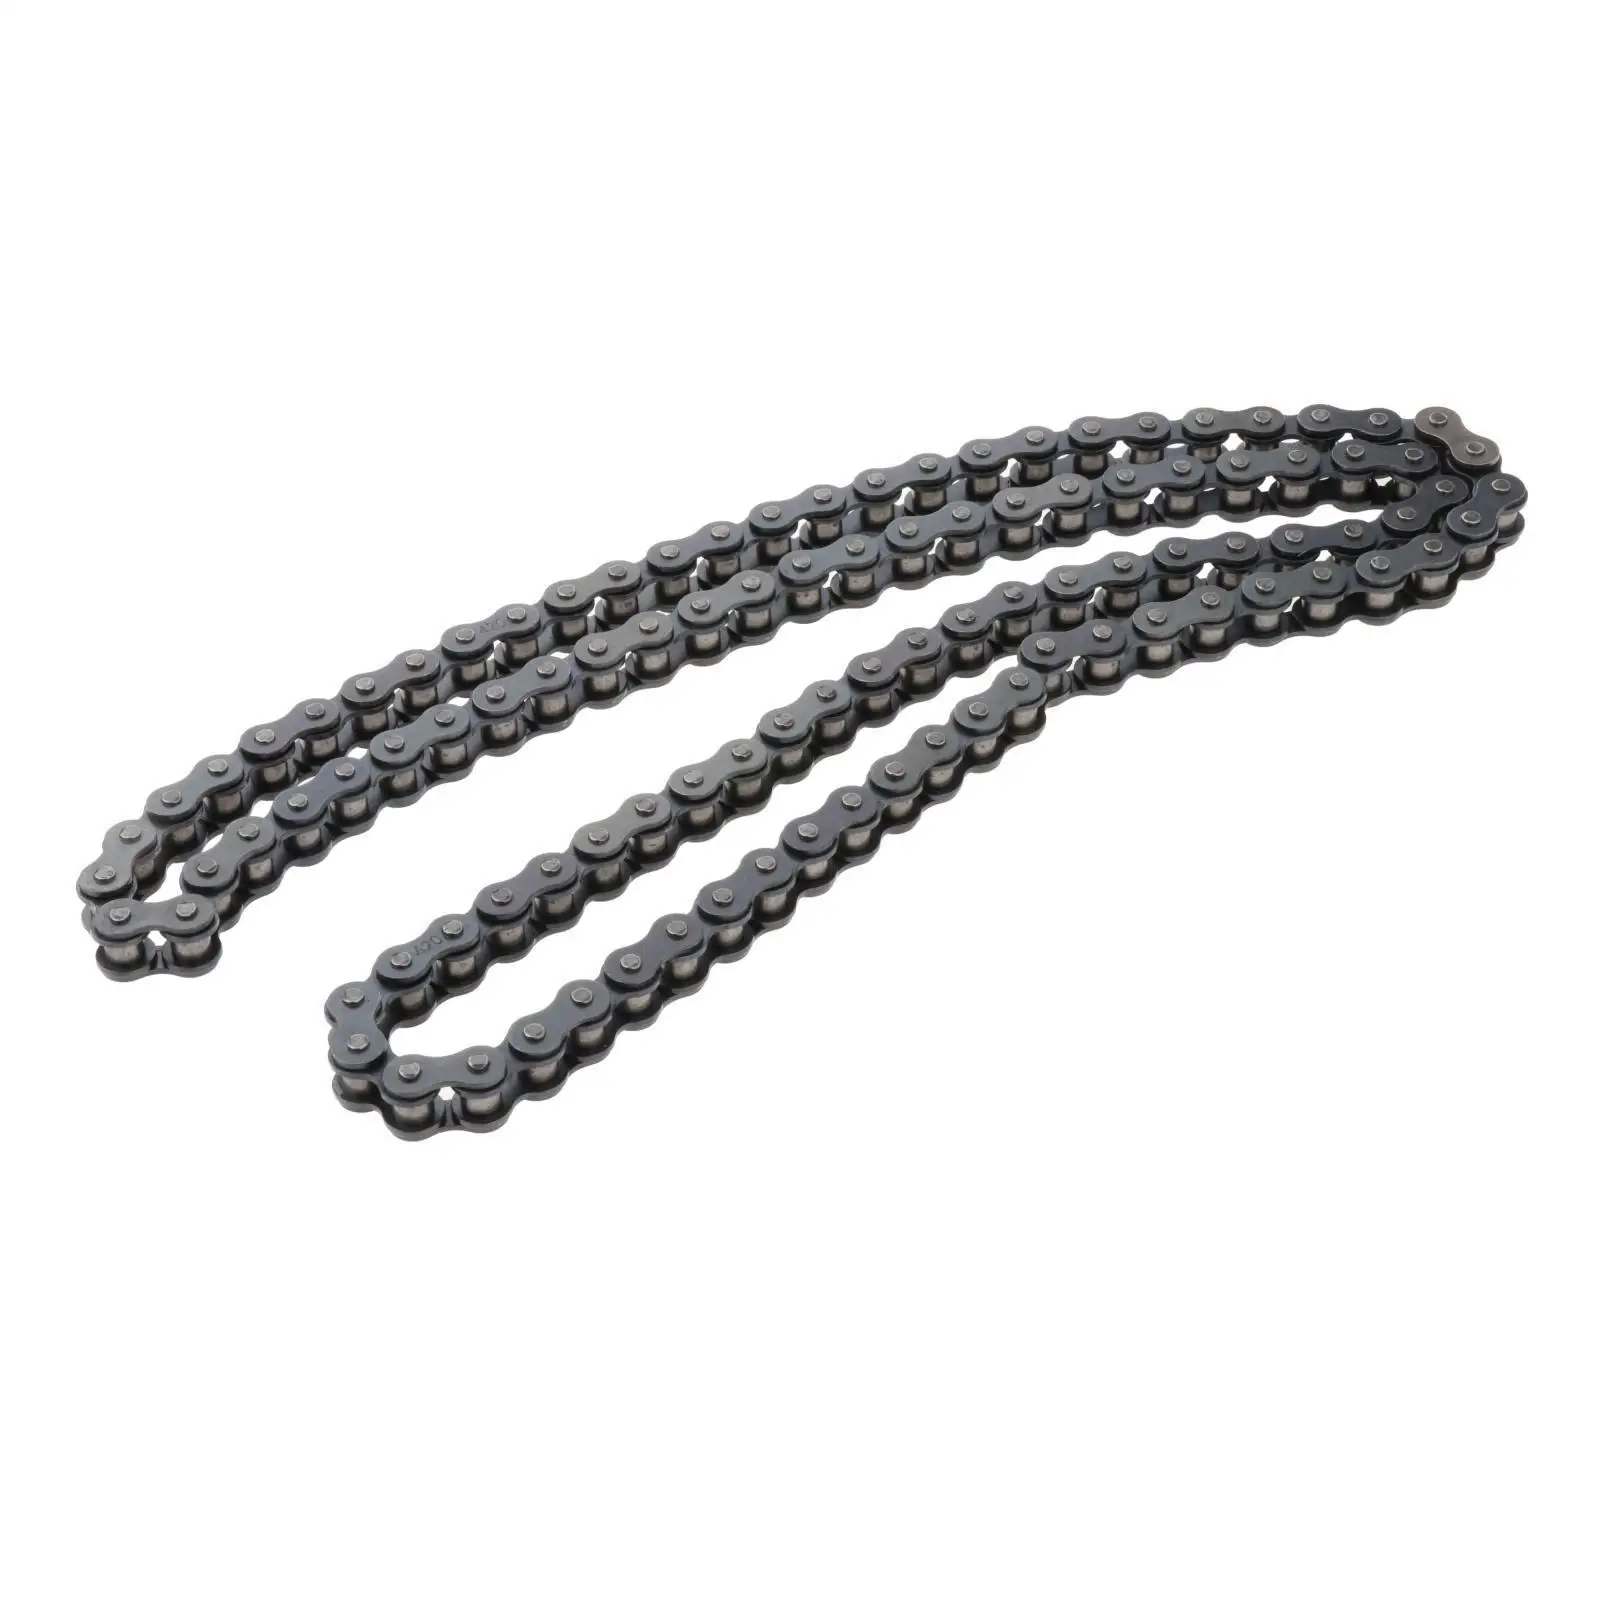 420 Motorcycle Chain 50-110Cc Drive Chain Accessories Fit for Mini Bike